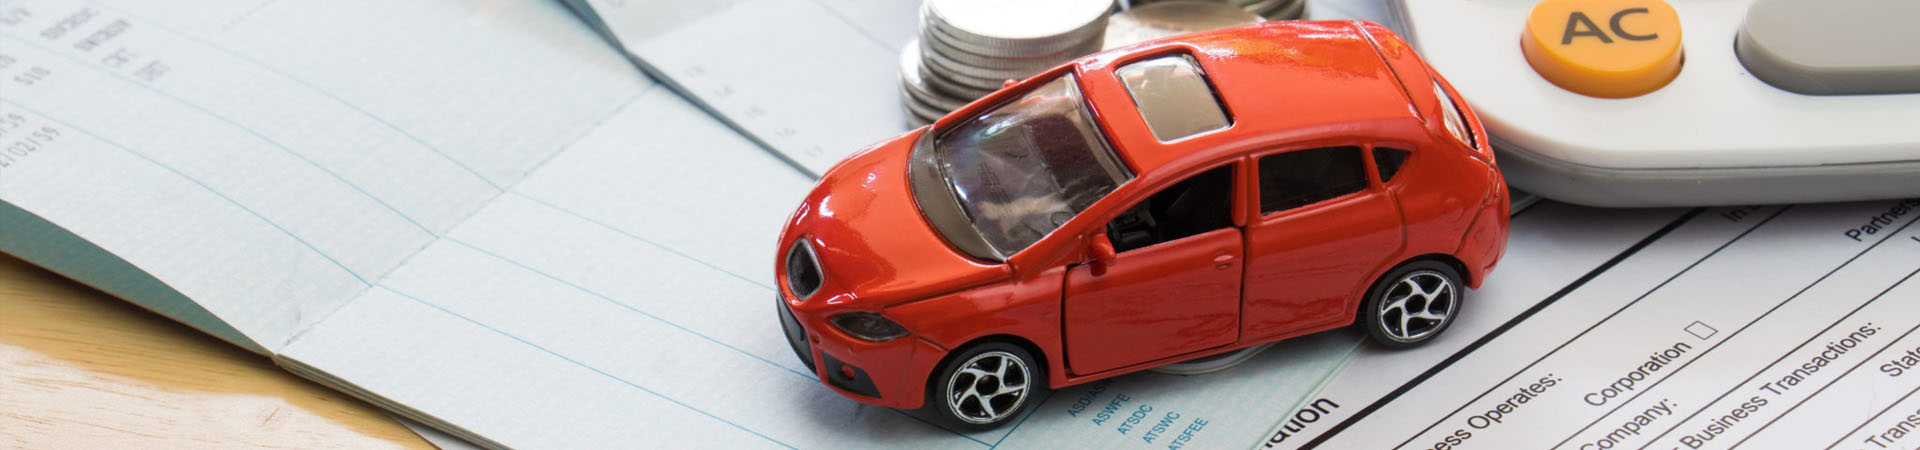 Web App Development for Car Insurance Claim Estimation with the Use of 3D Models